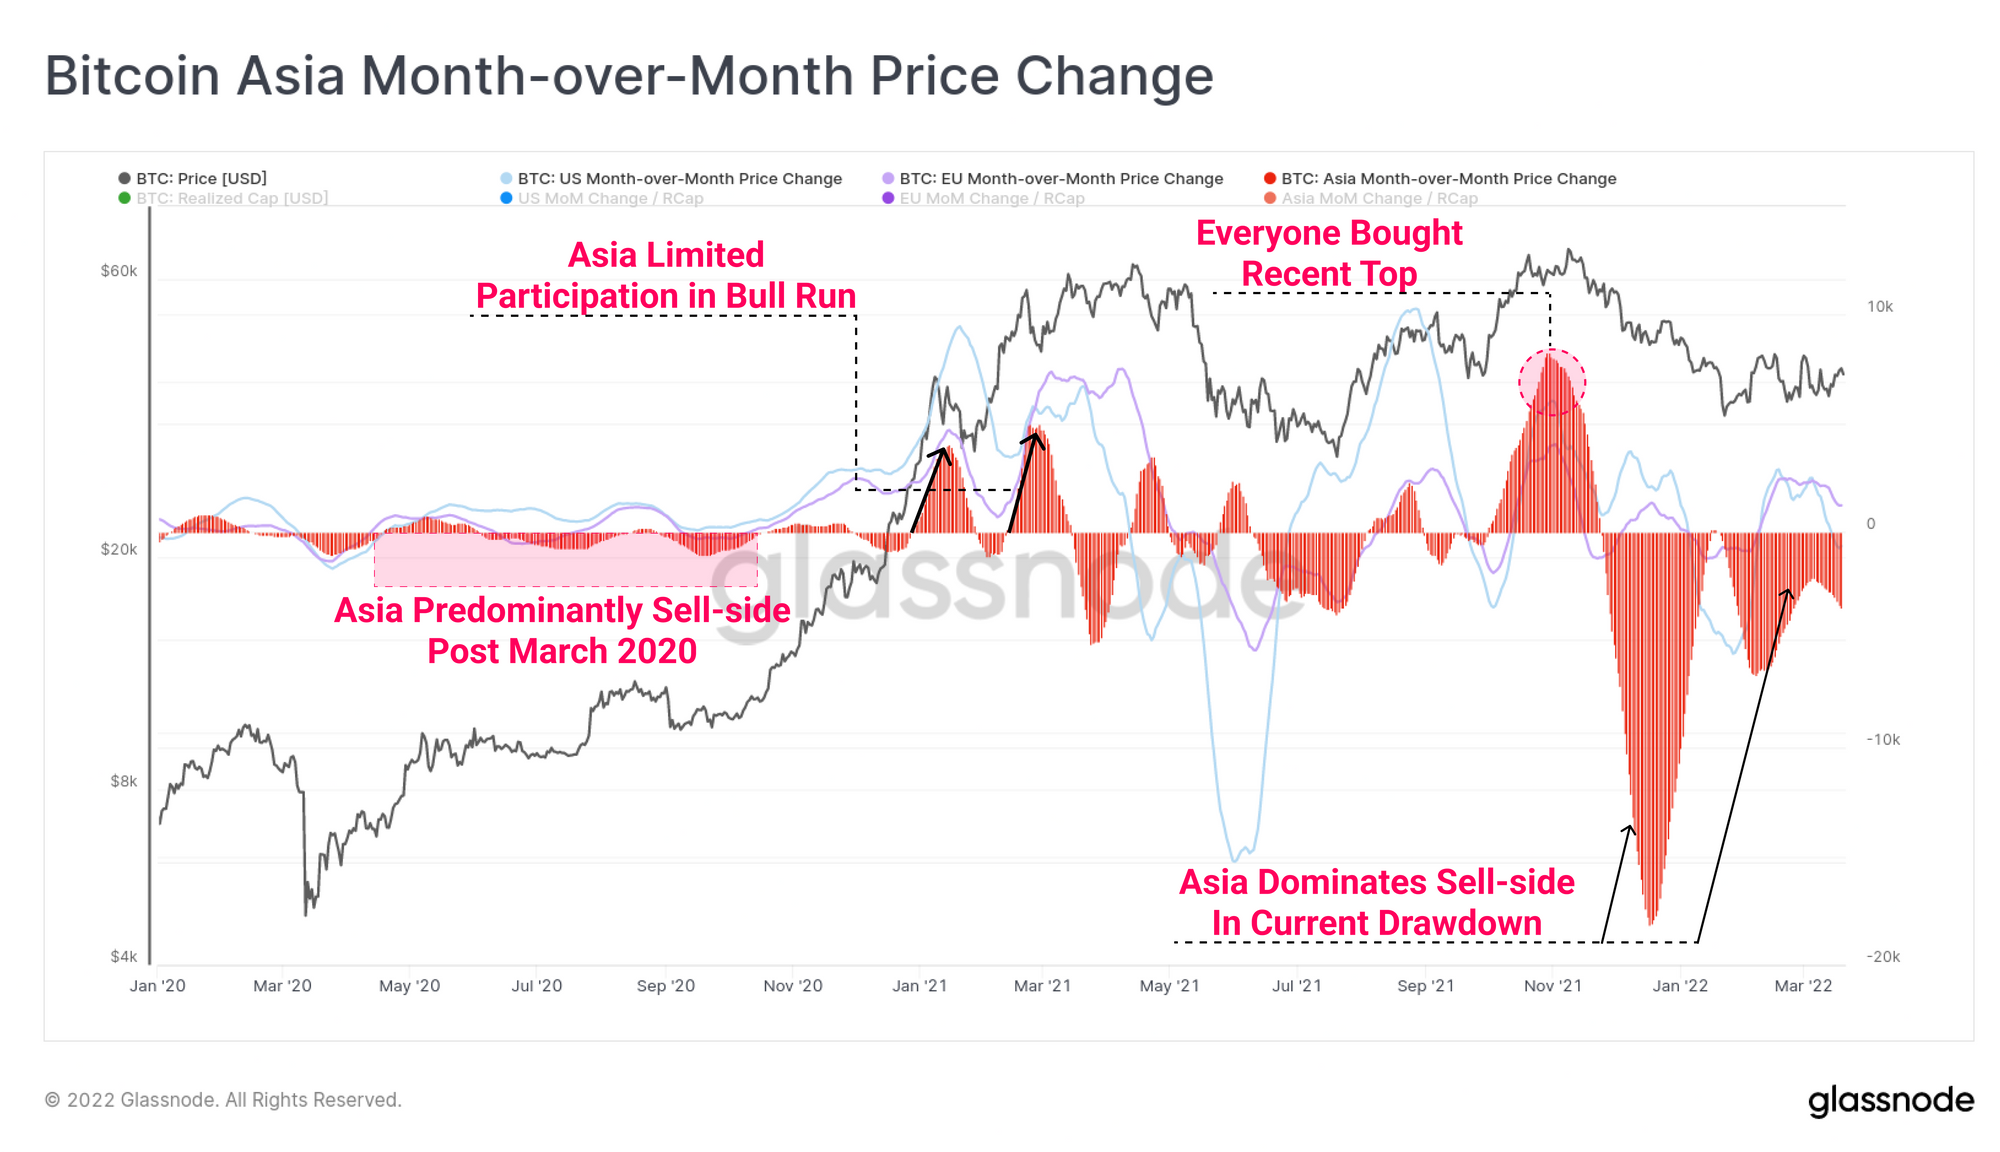 Glassnode Bitcoin Asia Month-over-Month Price Change